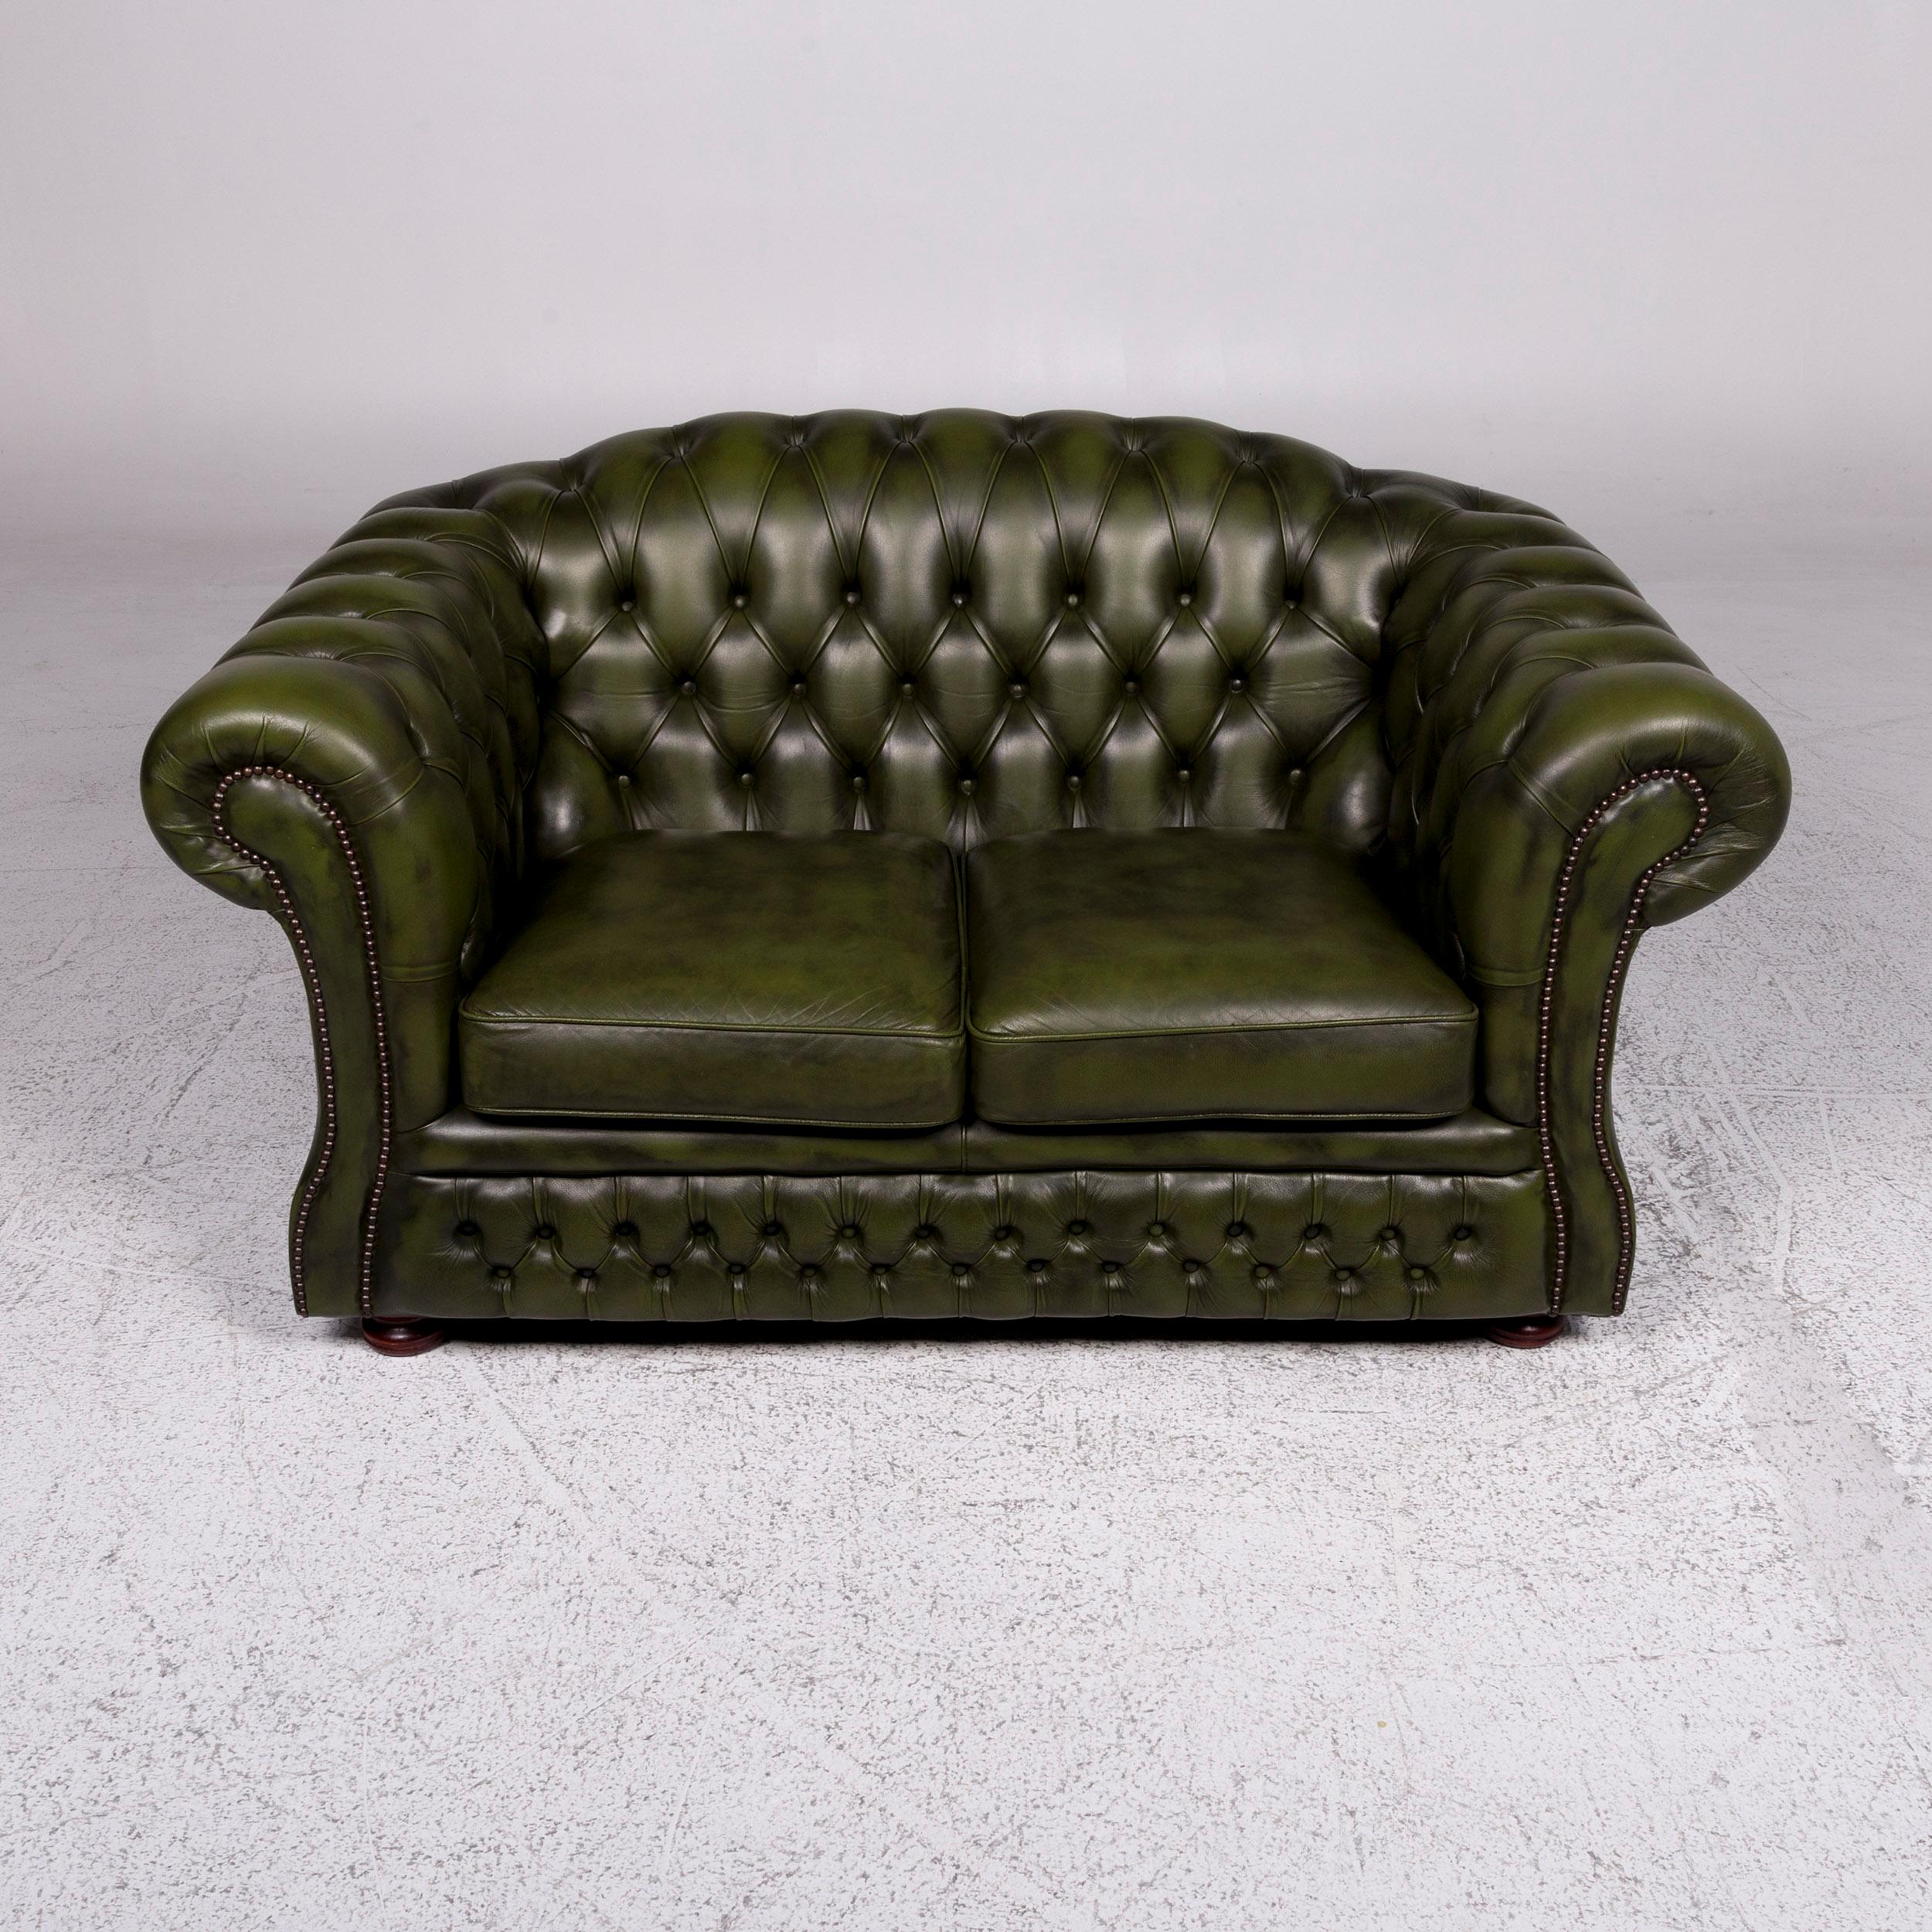 Contemporary Chesterfield Leather Sofa Green Two-Seater Retro Couch For Sale